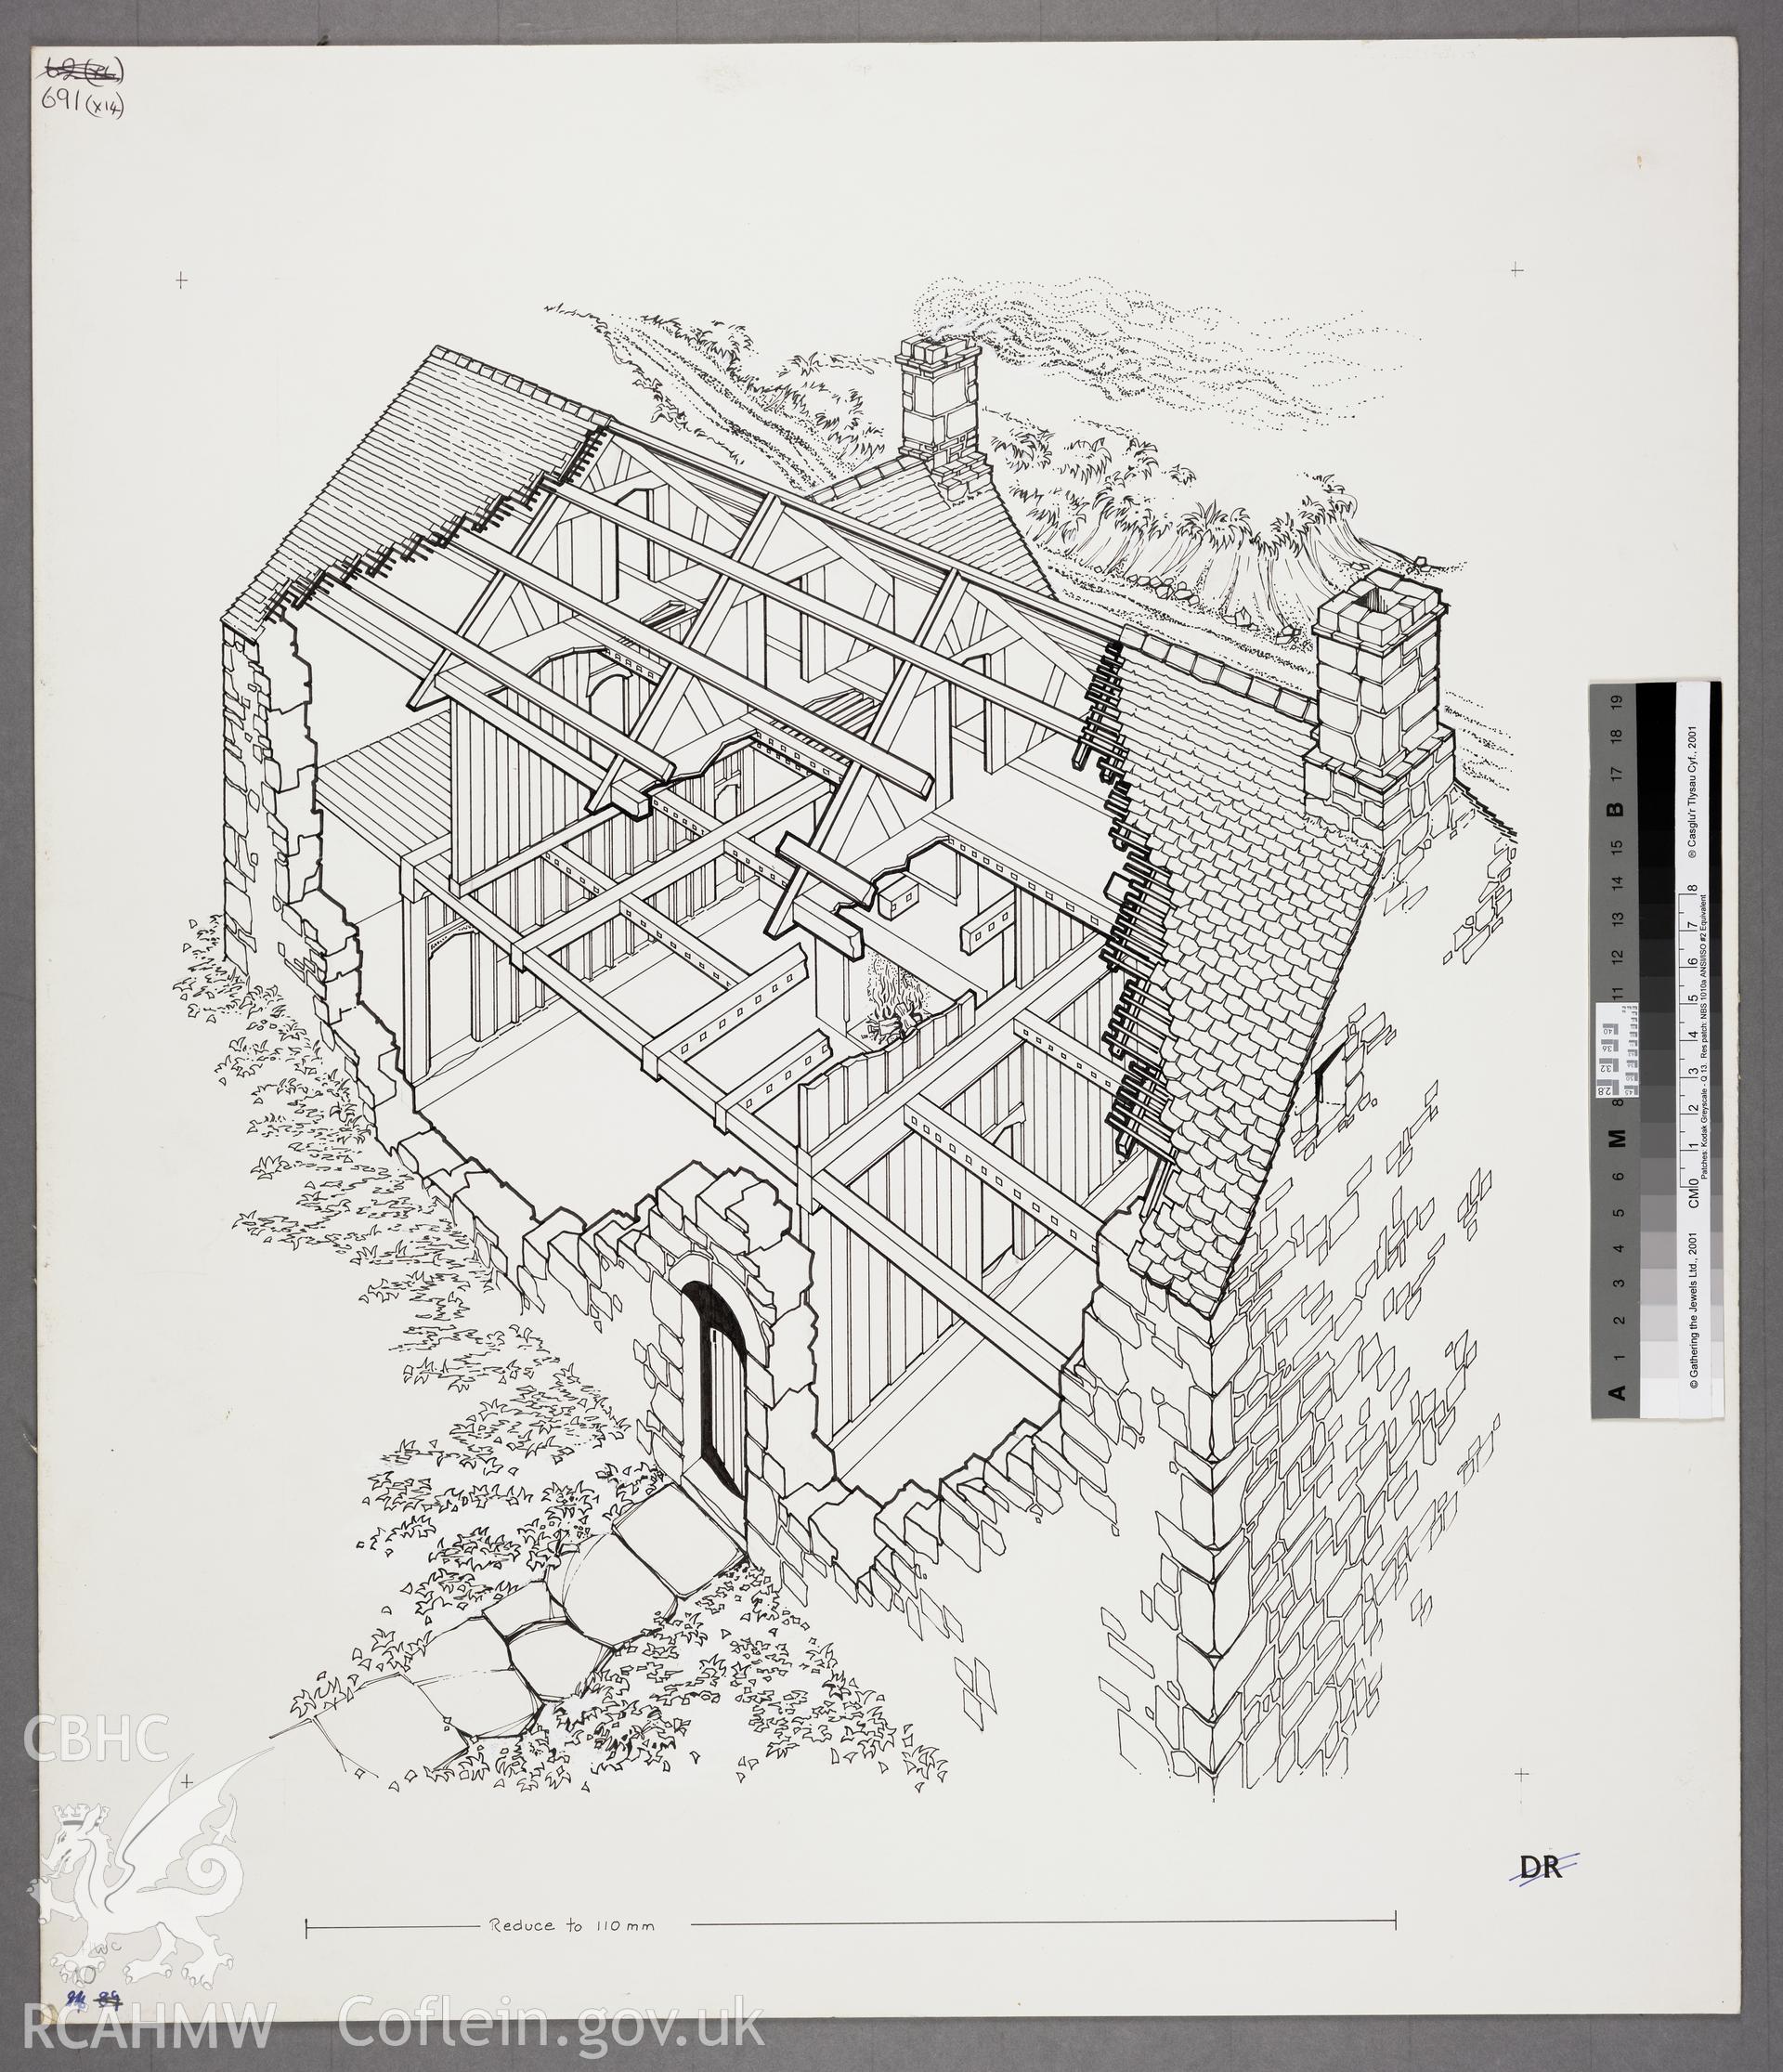 RCAHMW drawing showing cutaway of Plas Newydd, Llanfair Talhaiarn, published in Houses of the Welsh Countryside, fig 90.